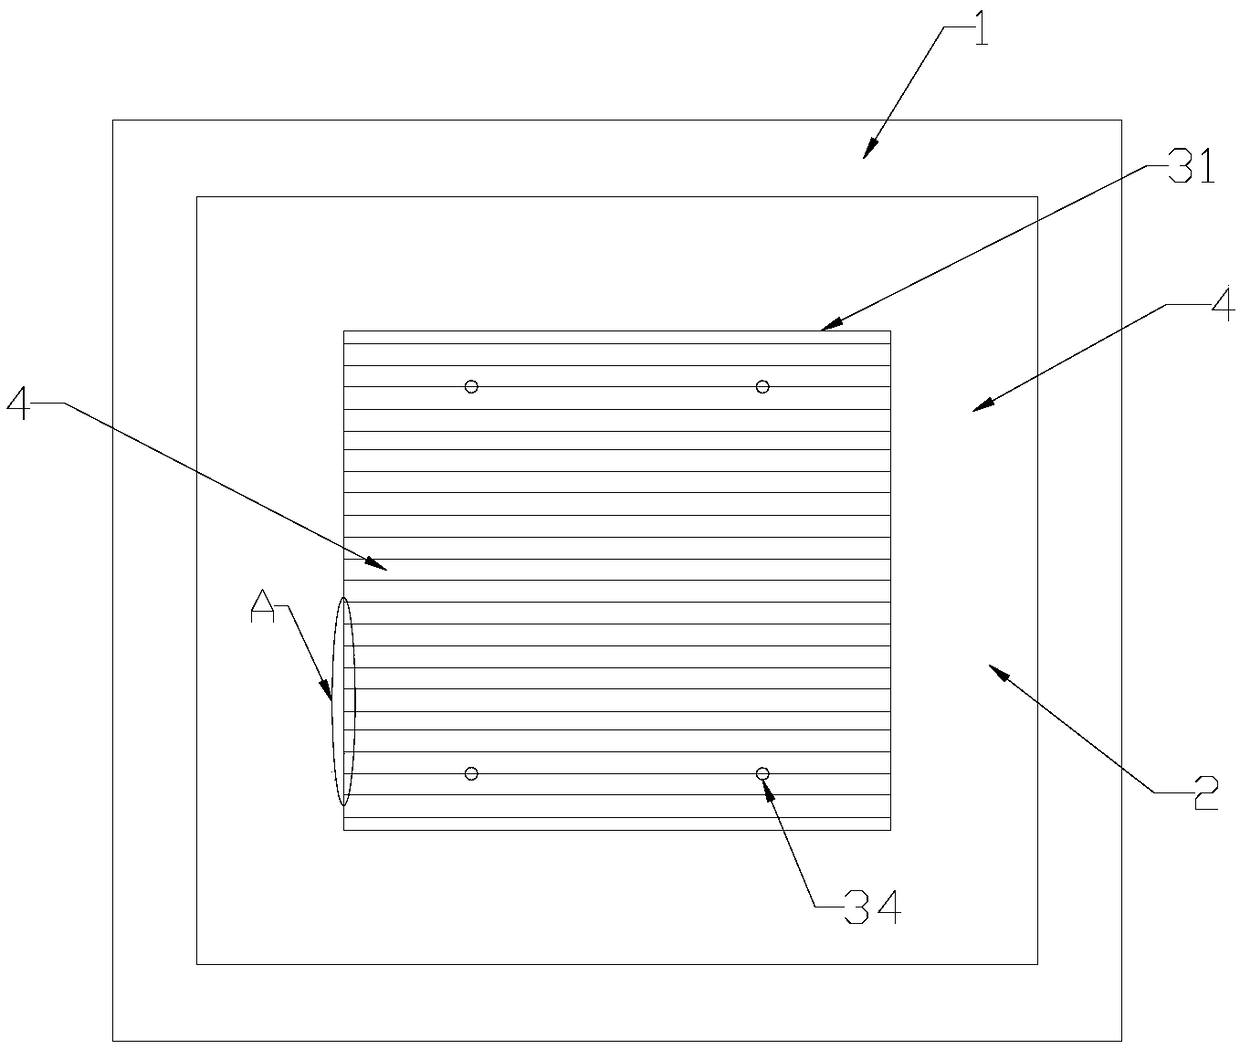 Screenless secondary printing method for positive electrode of crystalline silicon solar cell